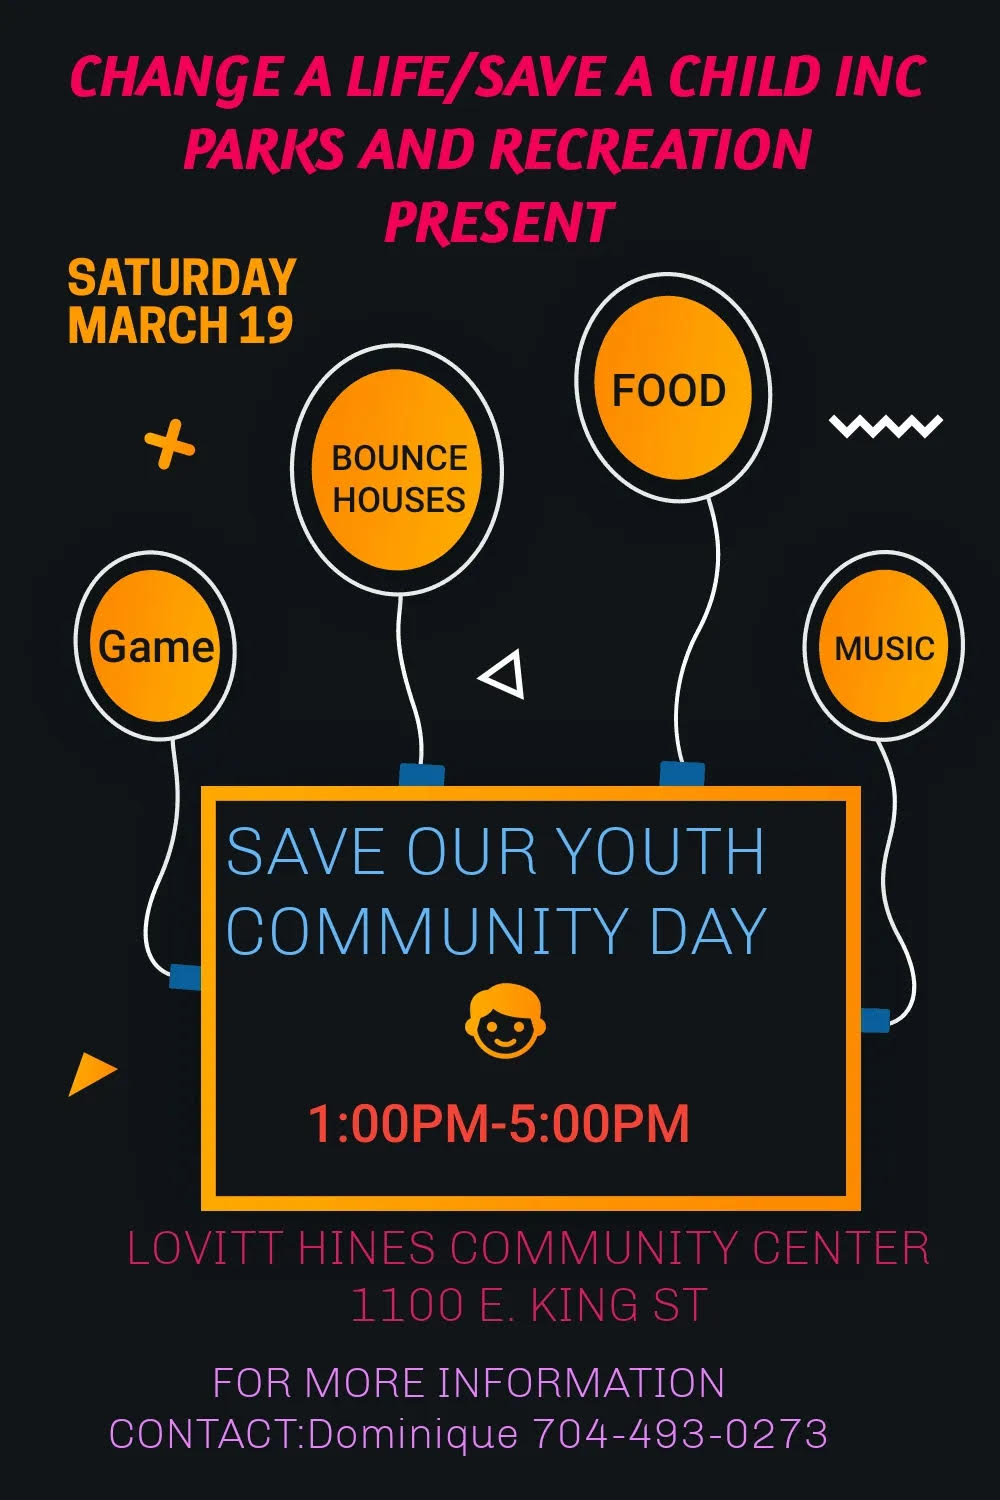 Save Our Youth Community Day